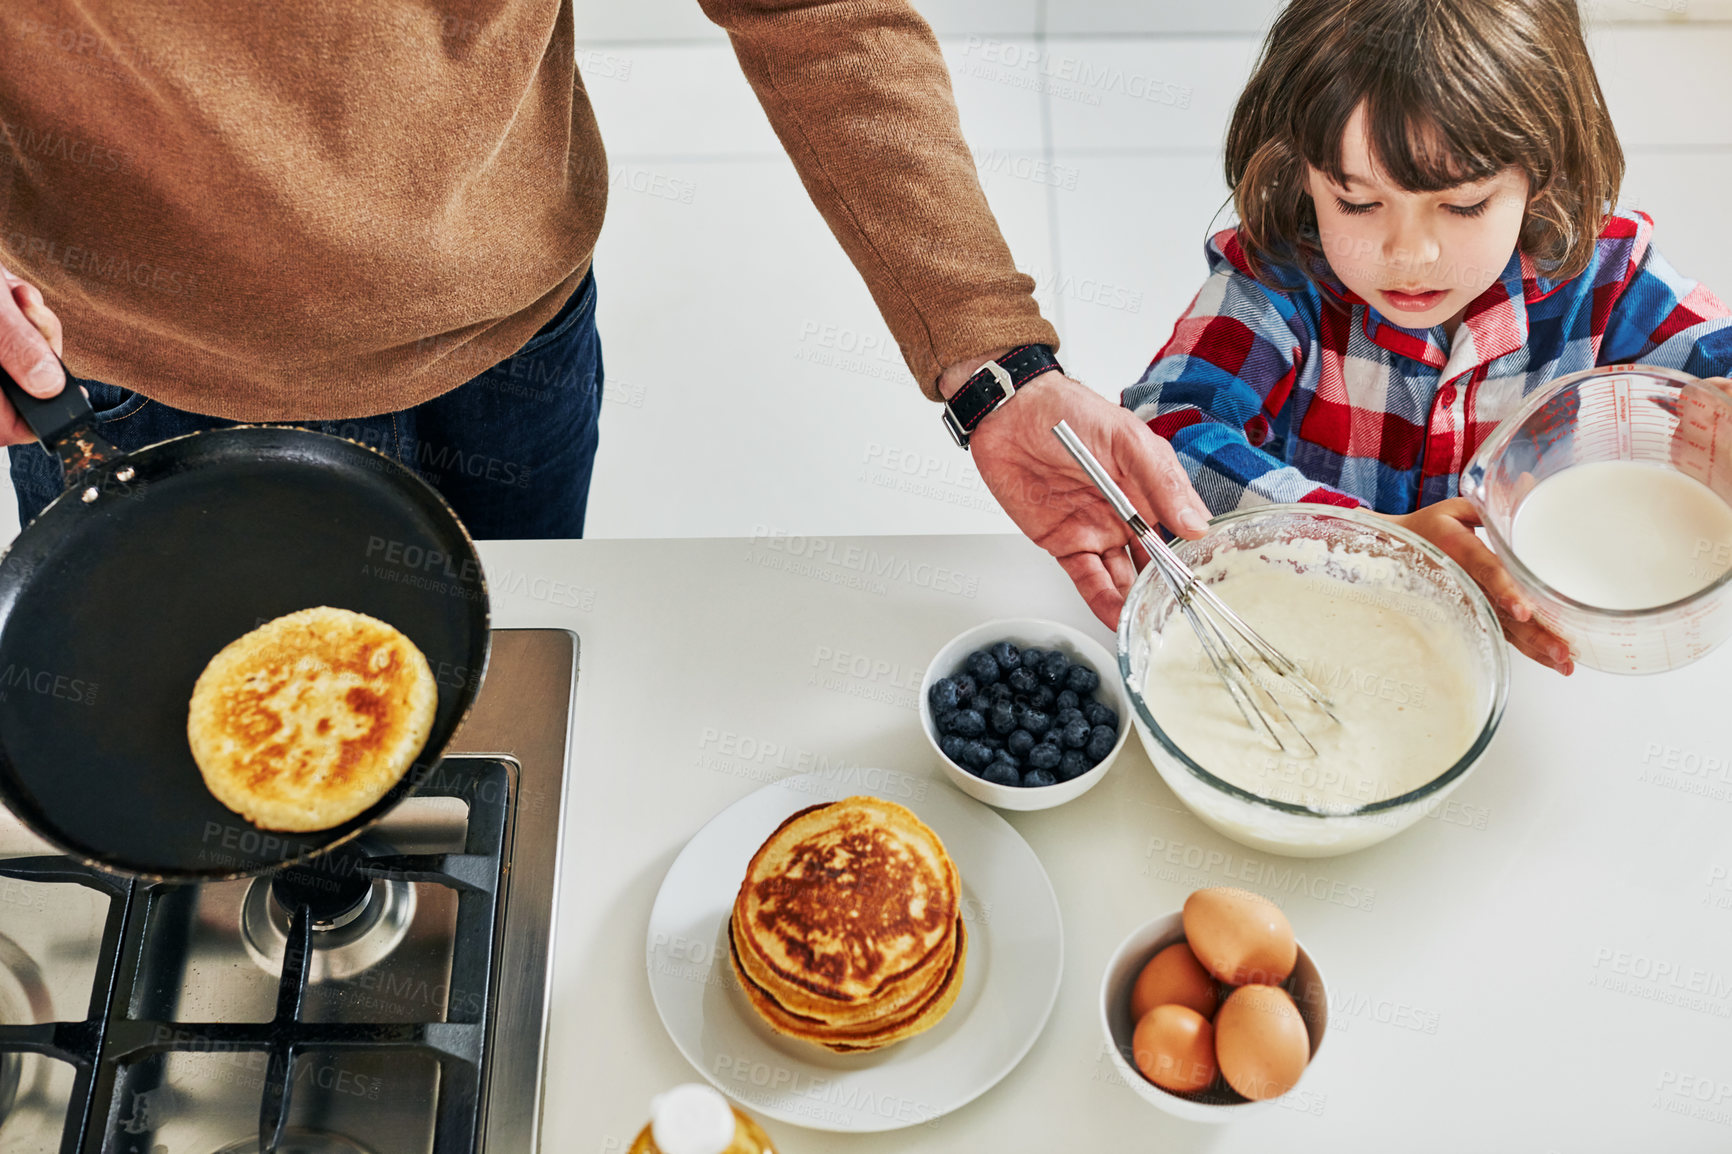 Buy stock photo High angle shot of an adorable little boy making pancakes with his unrecognizable father in the kitchen at home